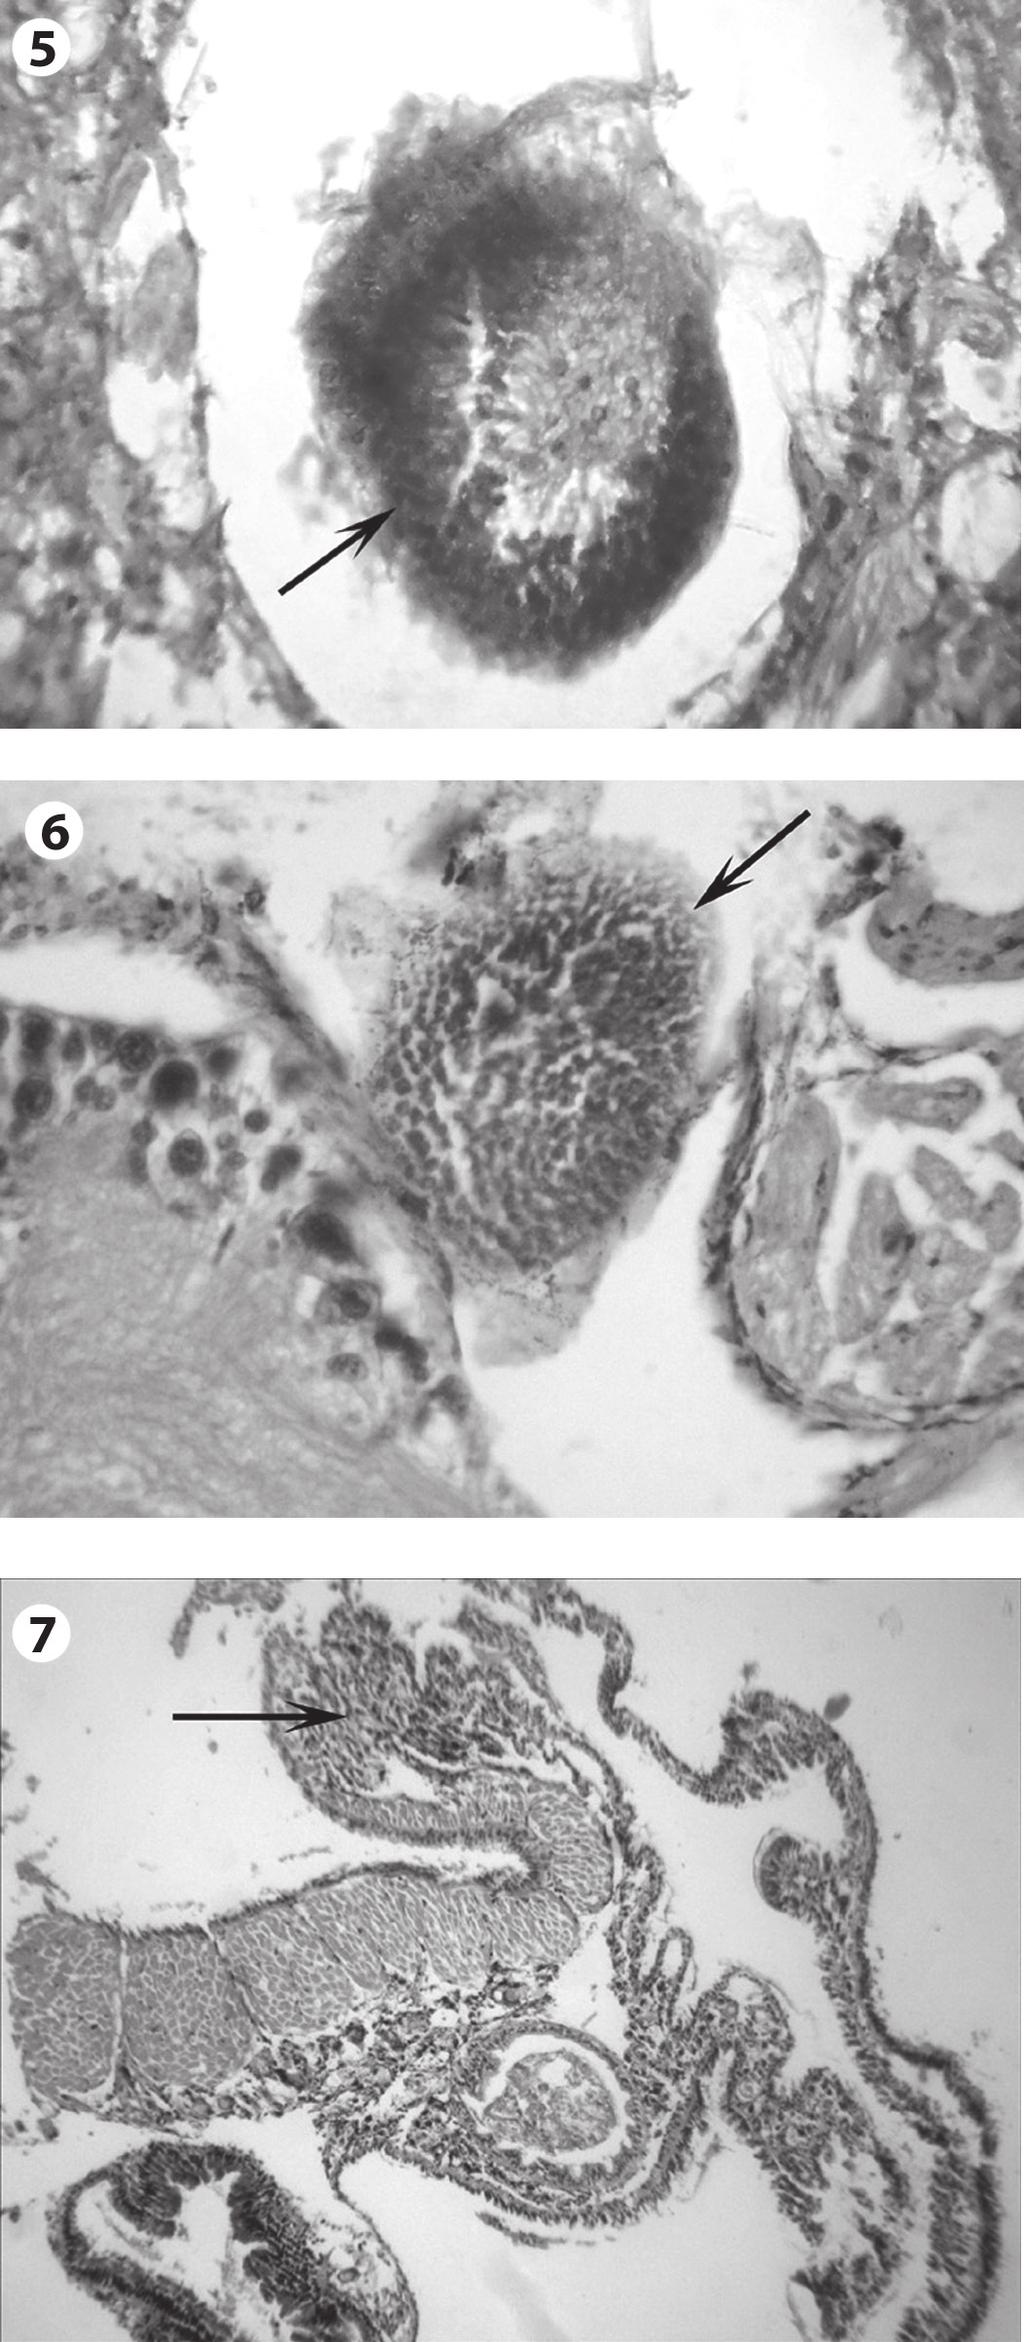 Loose hemocyte rich nodules were present in between the organs (Fig. 6).